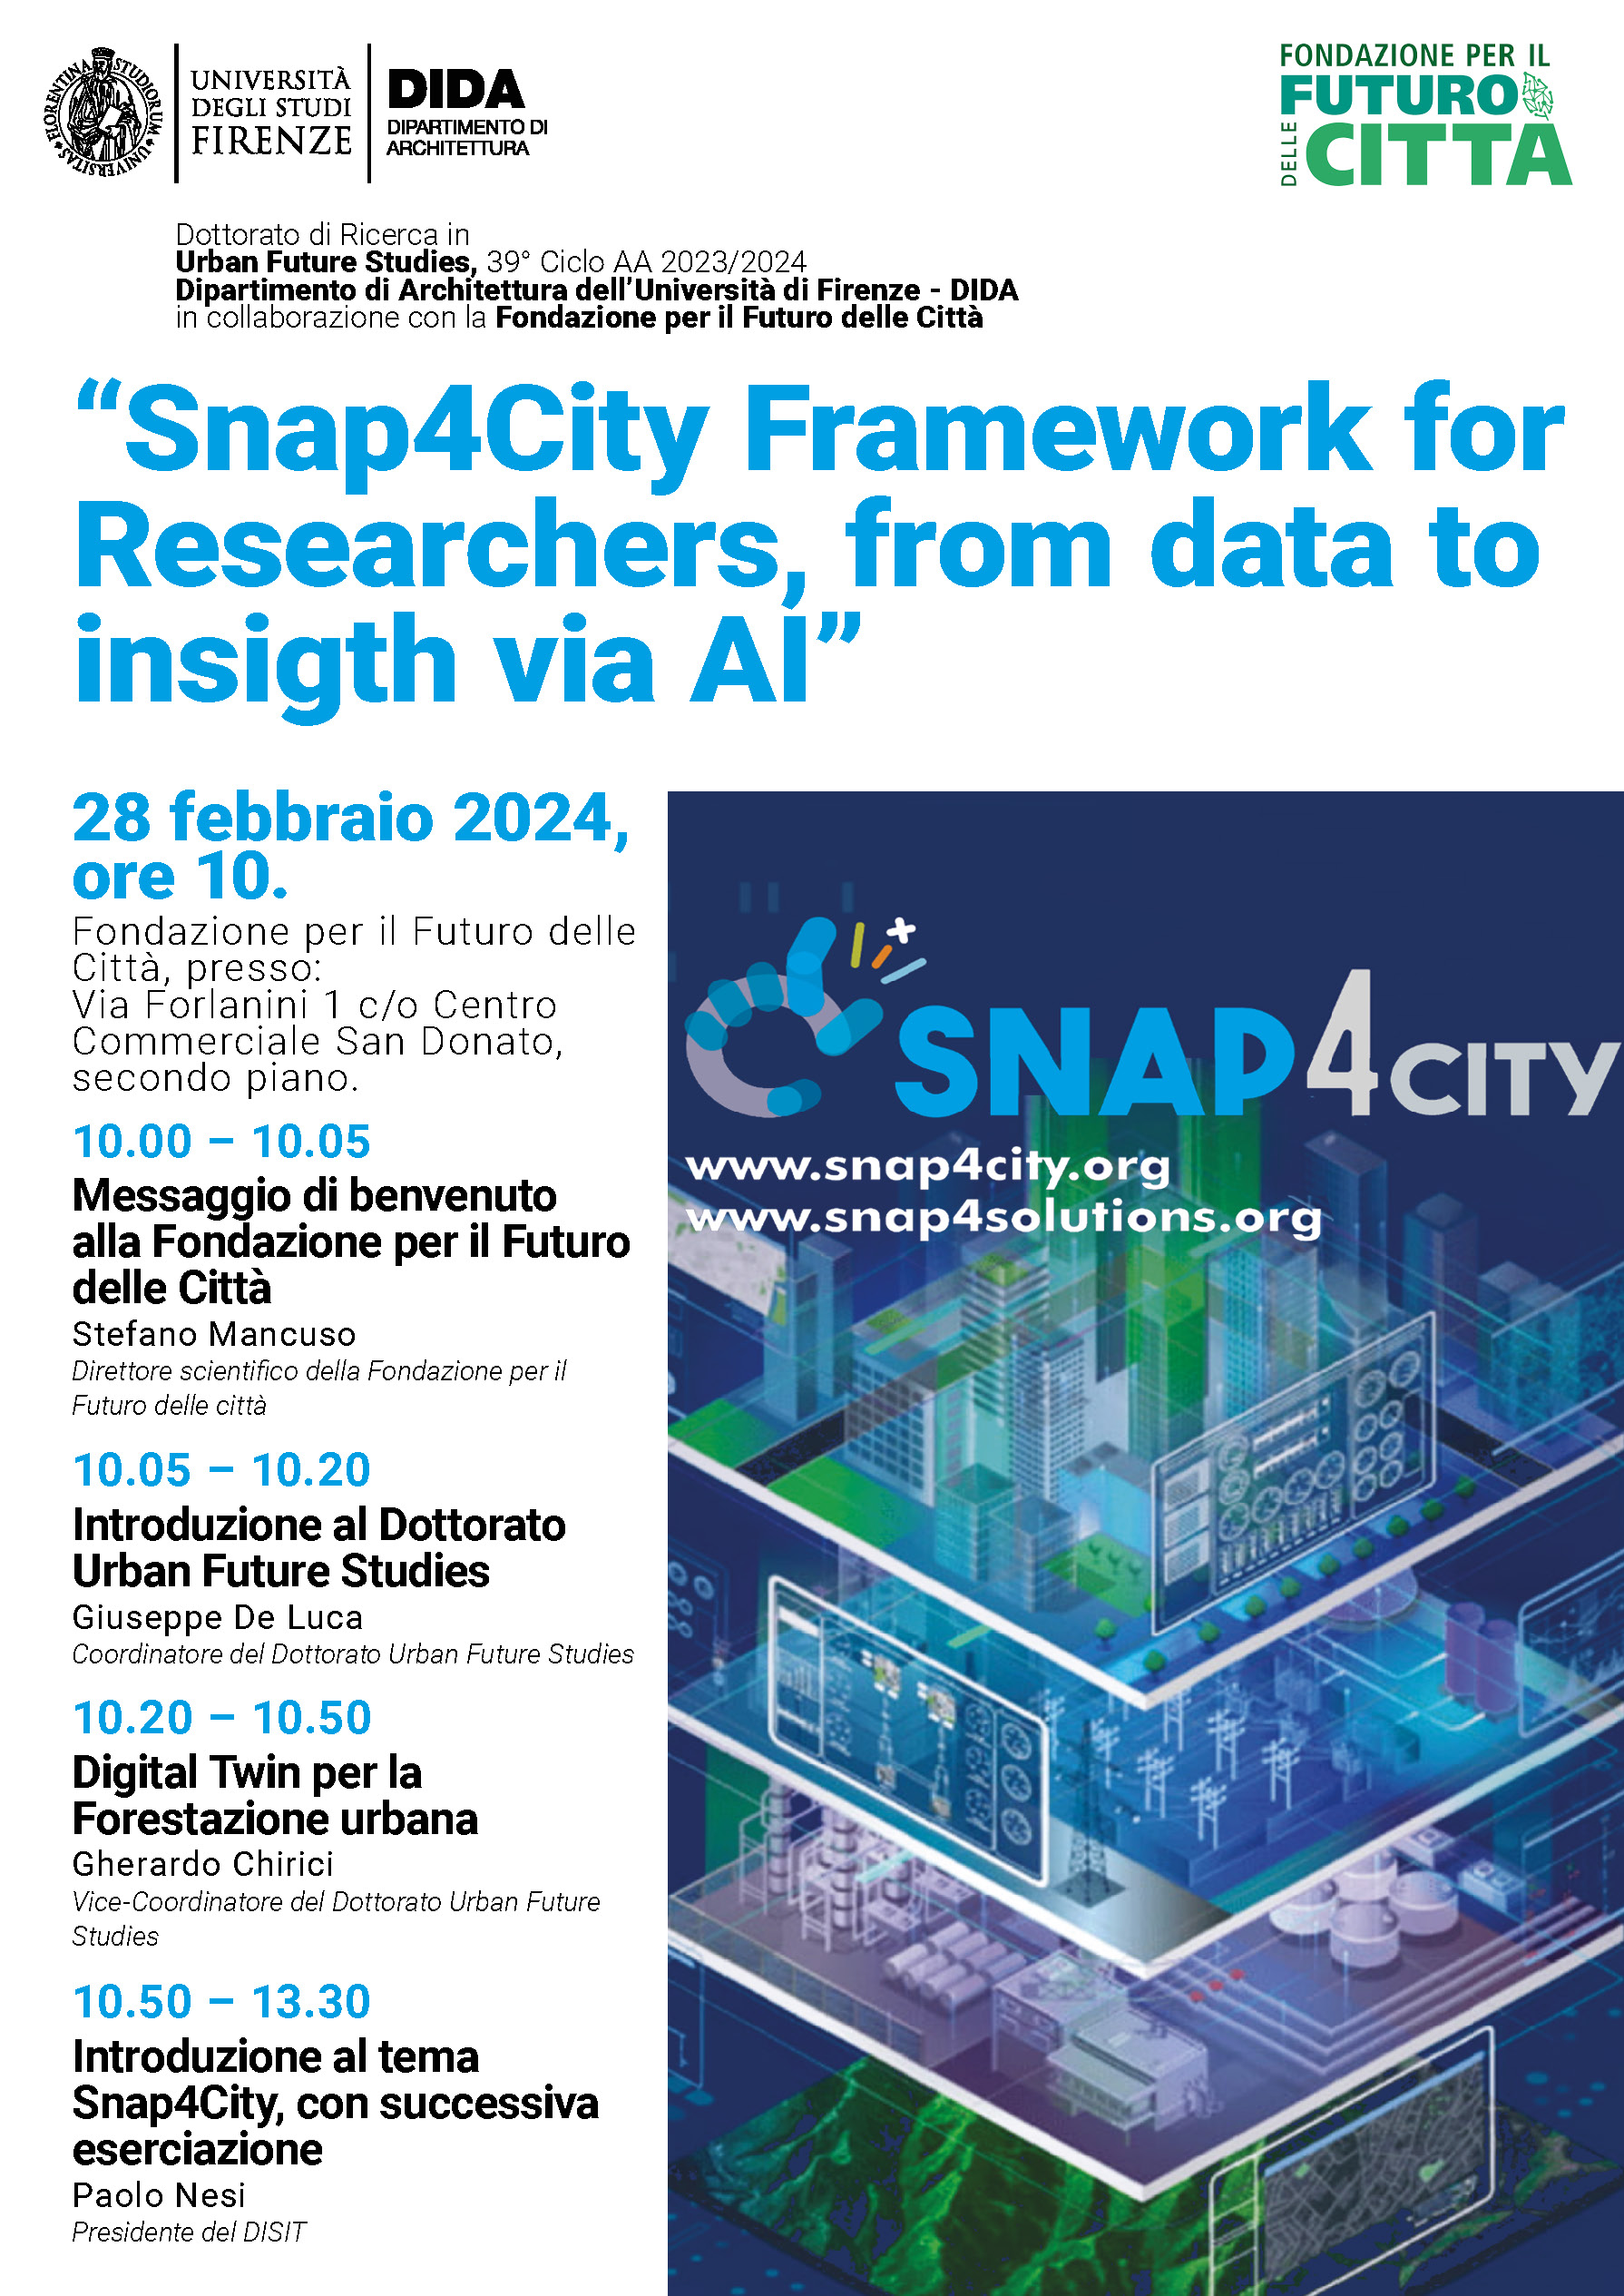 Snap4City Framework for Researchers, from data to insigth via AI